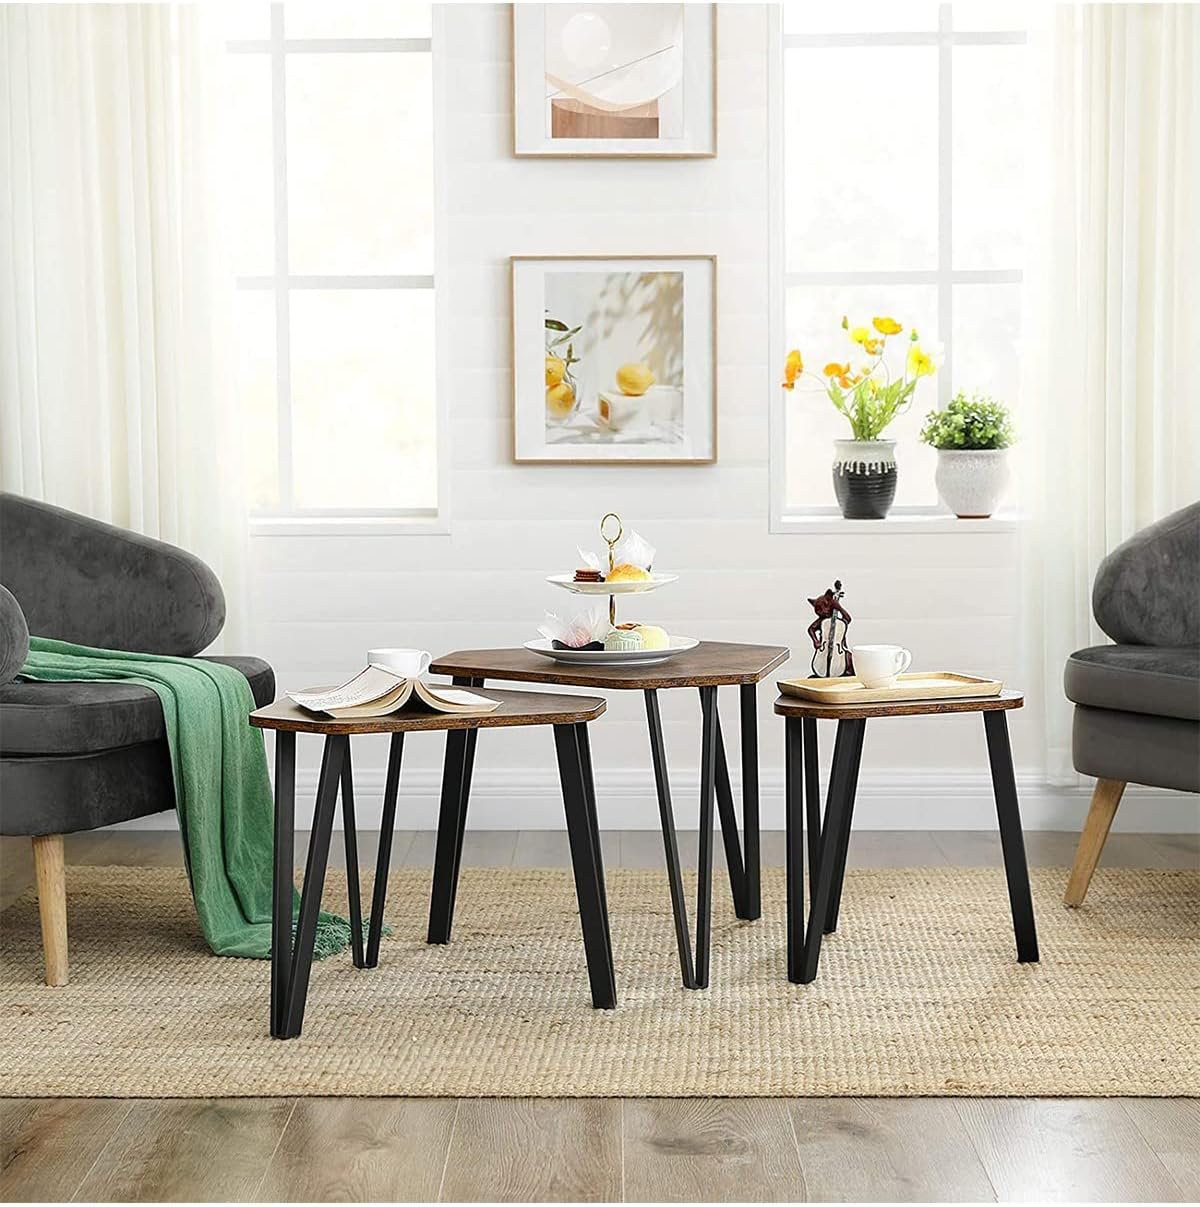 VASAGLE Nesting Coffee Table Set of 3 Rustic Brown and Black LNT14BXV1